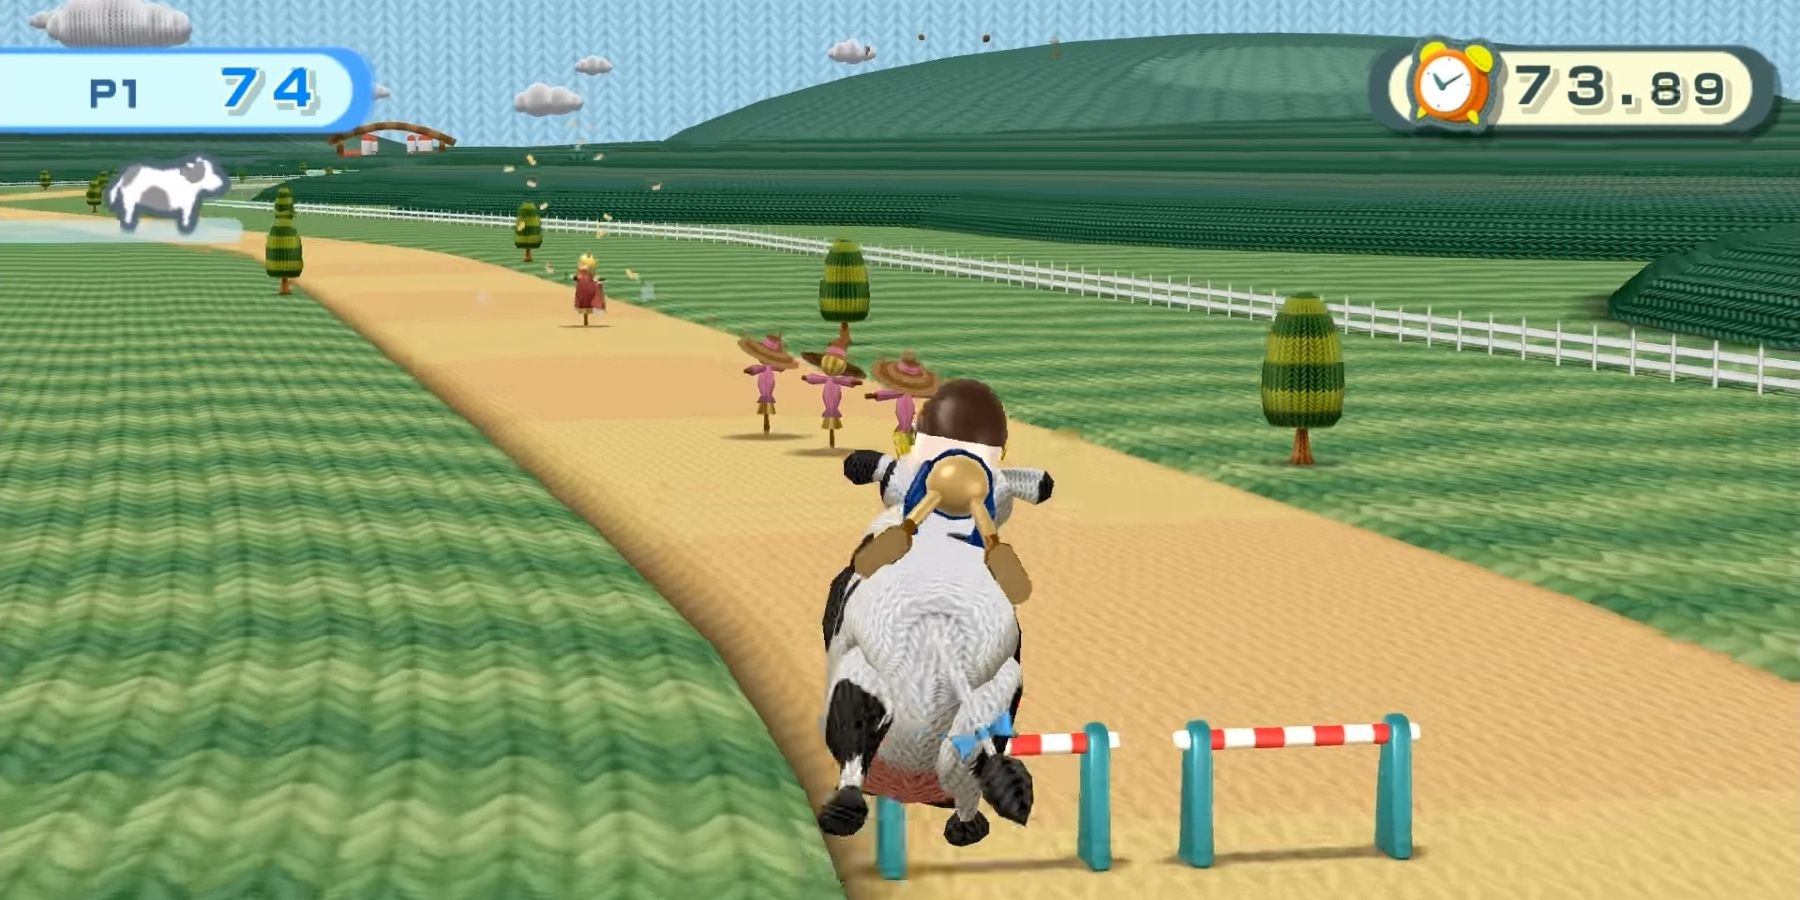 Cow racing gameplay in Wii Play